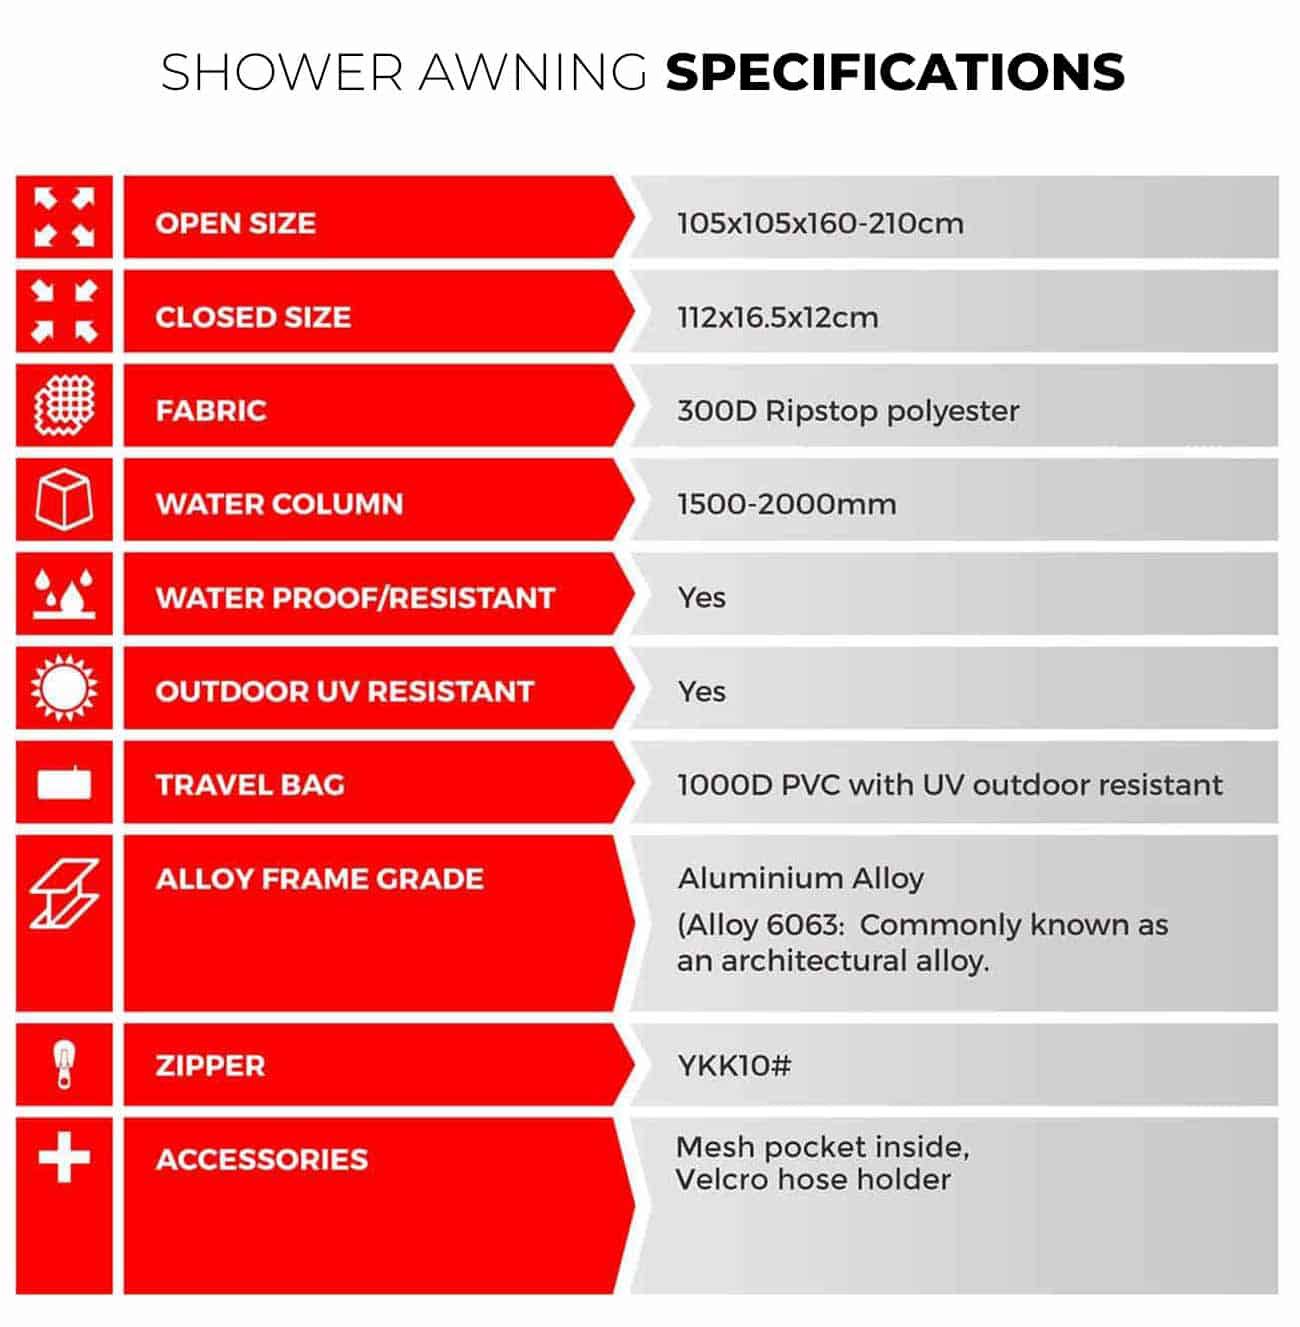 Shower awning - Specifications